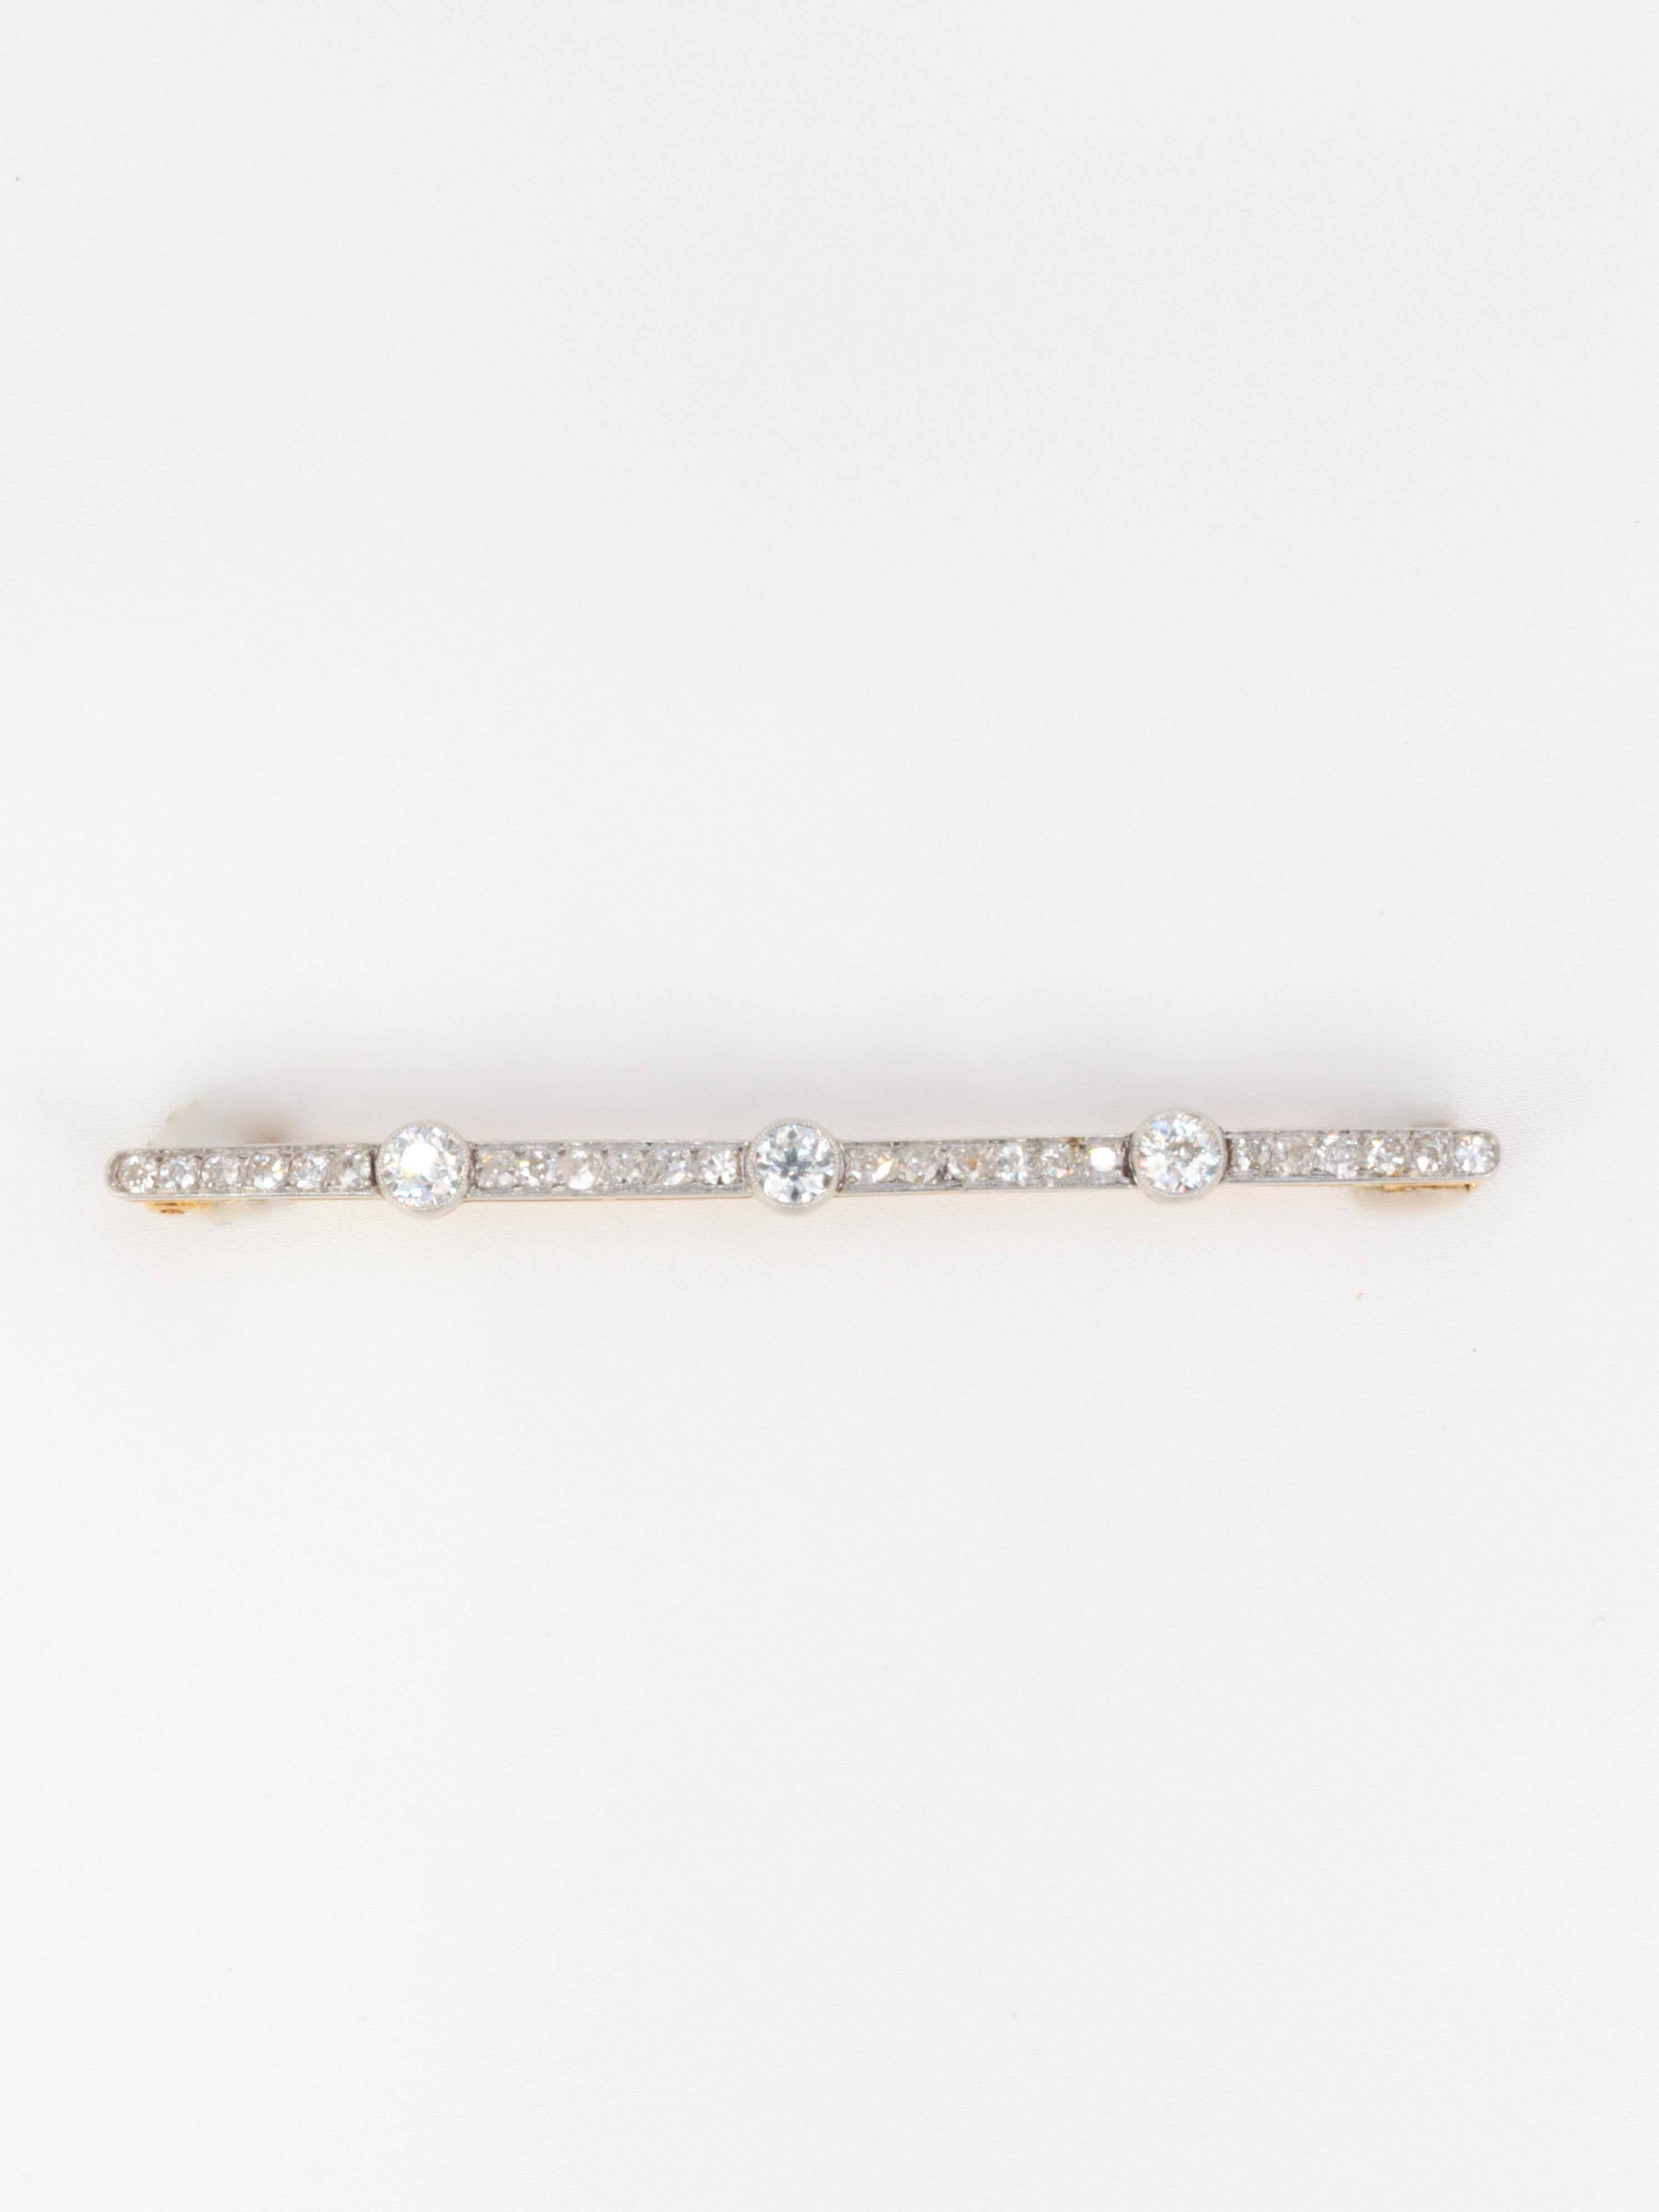 Round Cut Antique Barrette Brooch in Gold, Platinum and Diamonds For Sale